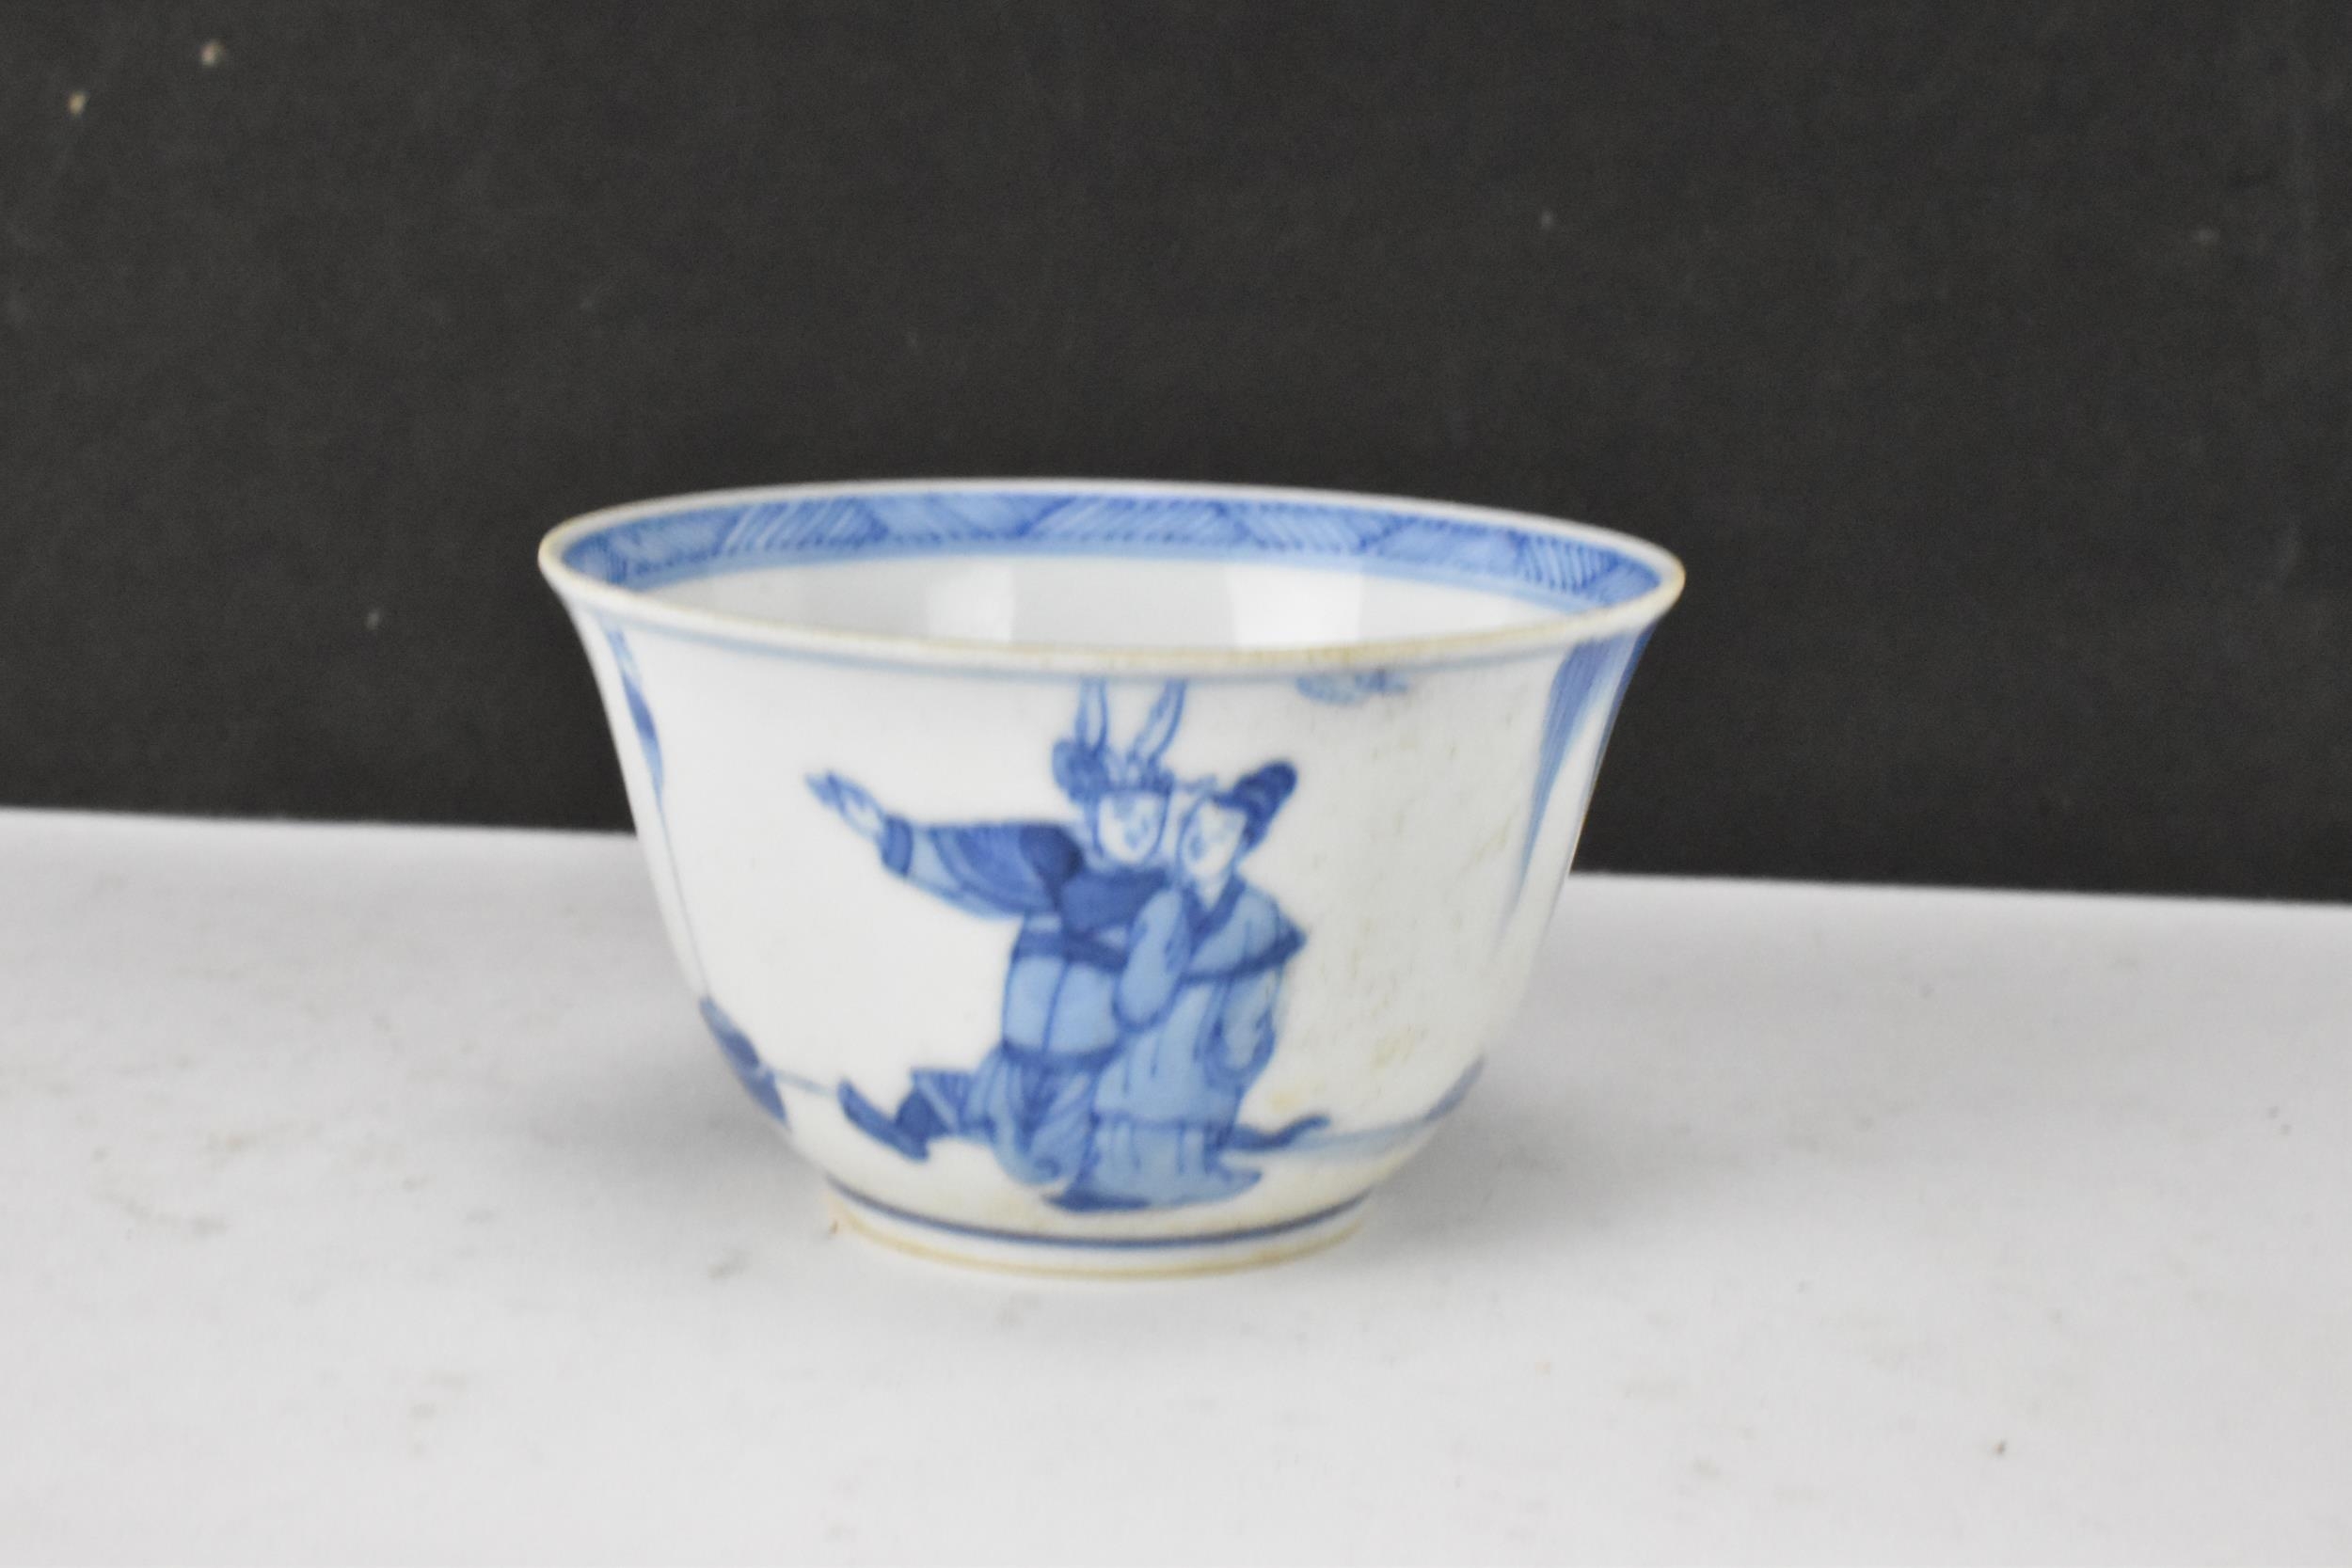 Three Chinese 20th century blue and white bowls, decorated with dragons and interiors with central - Image 7 of 9